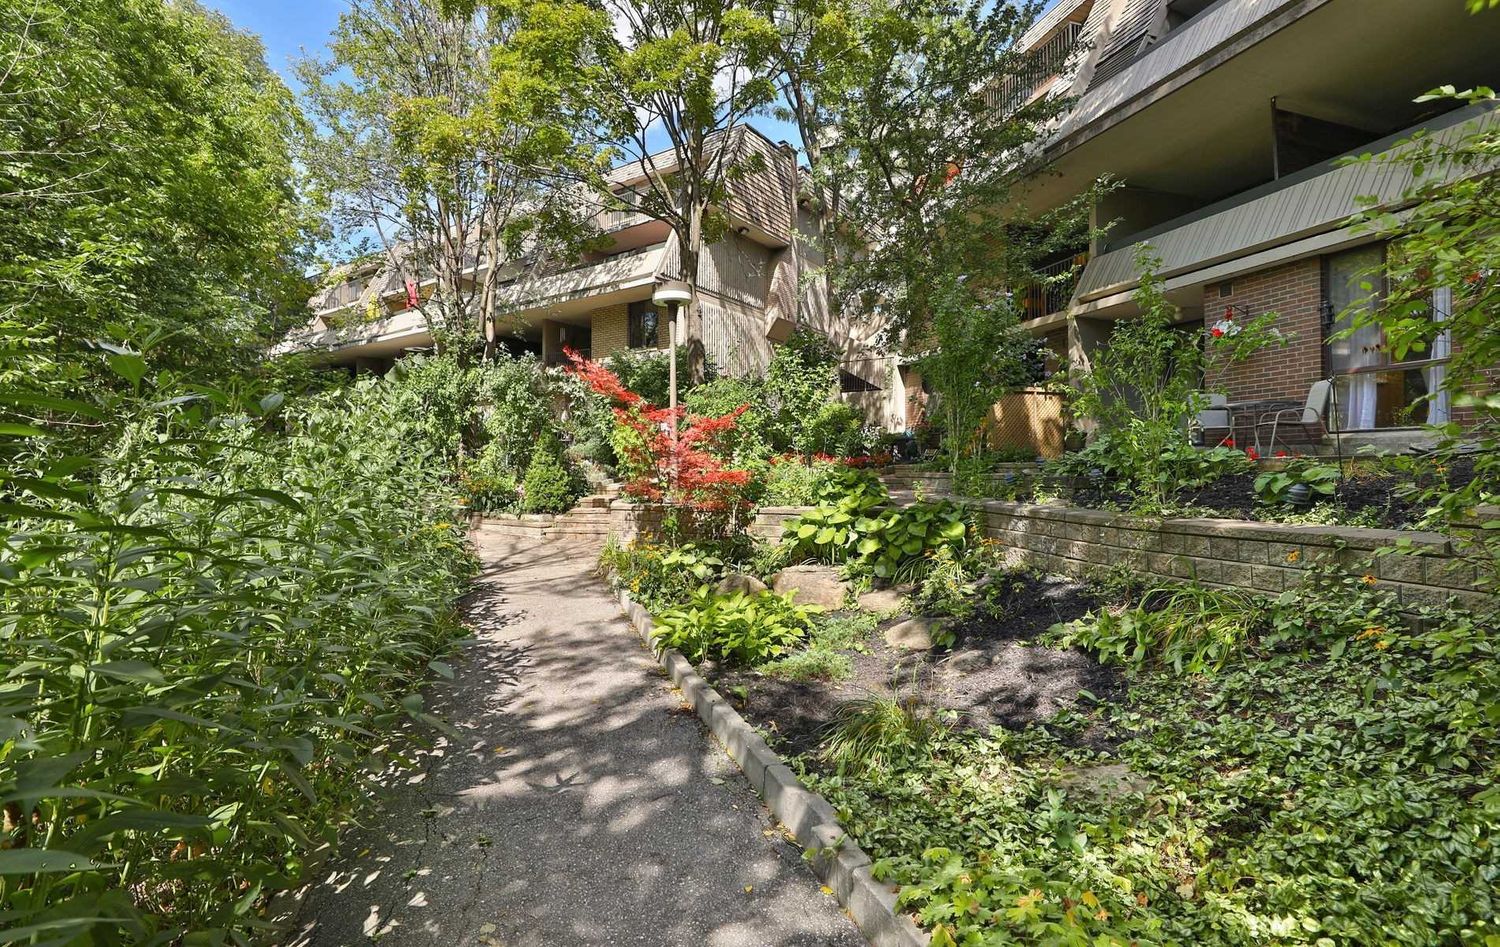 1330 Mississauga Valley Boulevard. 1330 Mississauga Valley Townhomes is located in  Mississauga, Toronto - image #2 of 2